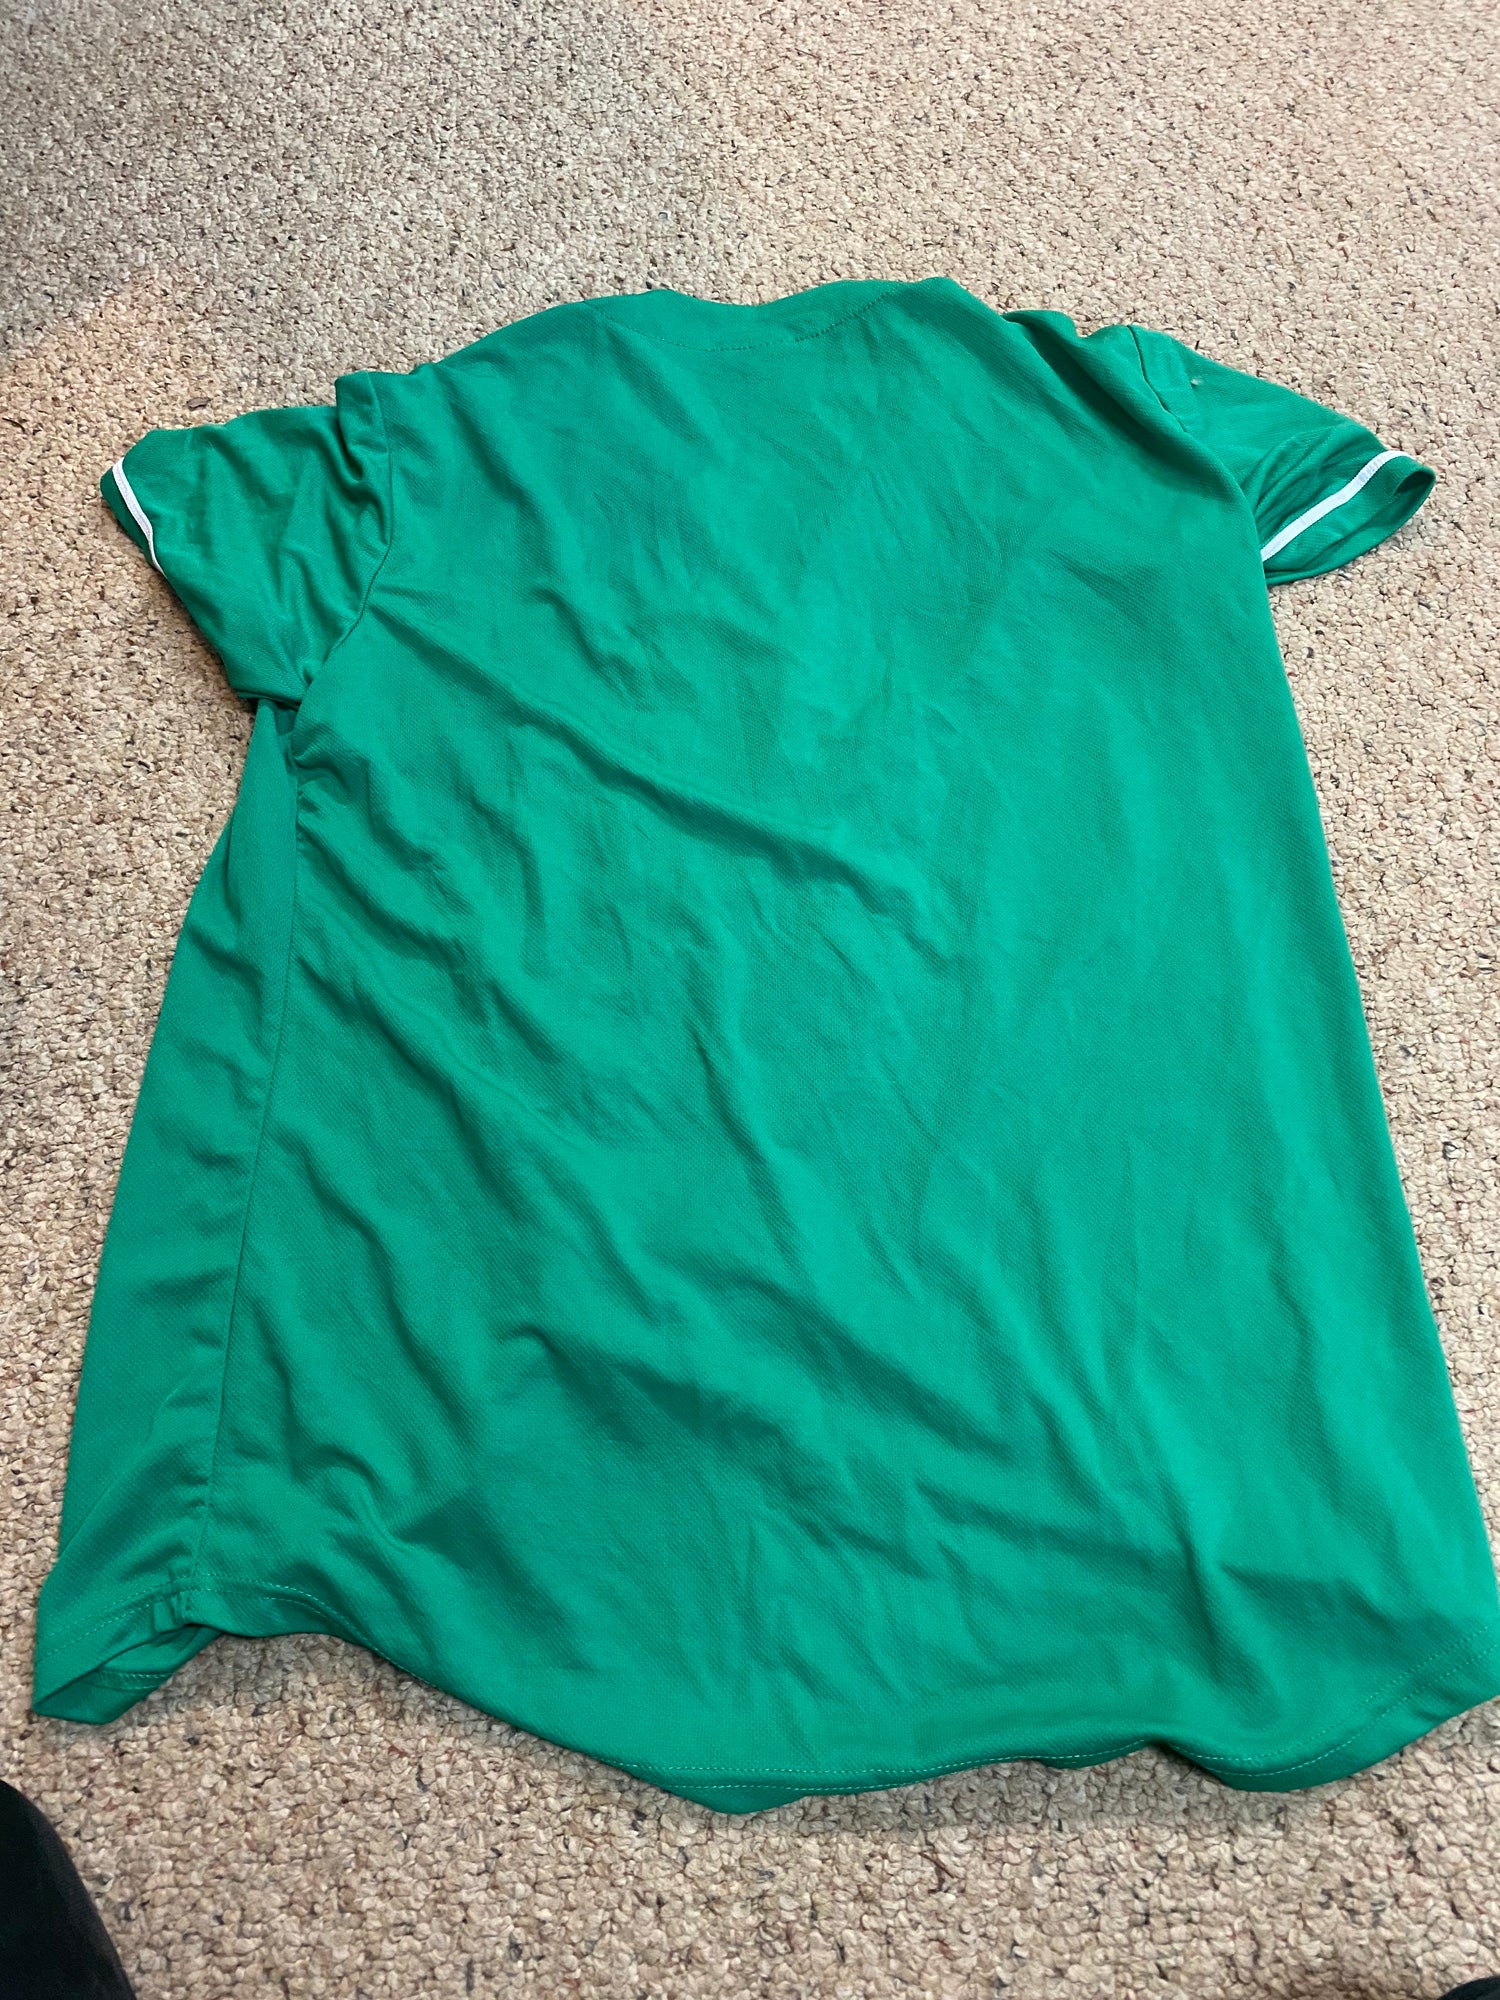 Philadelphia Phillies Abad Team Issued Jersey 44 St Patricks Day Green,  in 2023